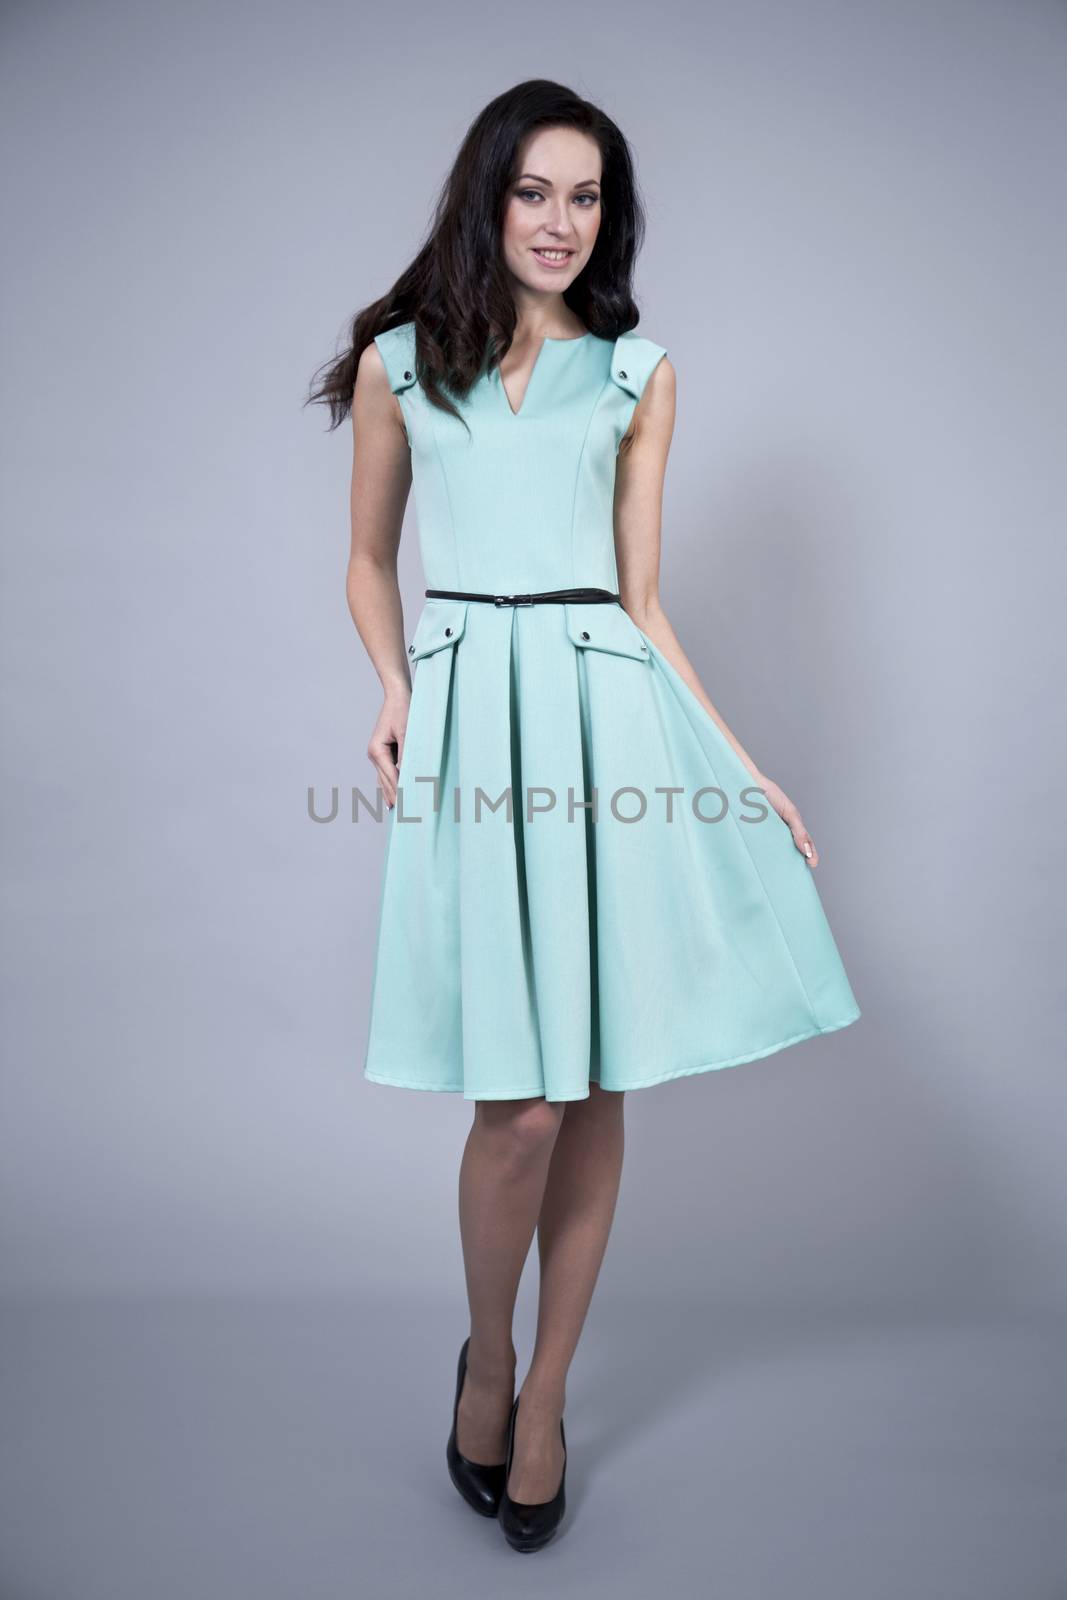 Beautiful young woman in a turquoise dress by andersonrise